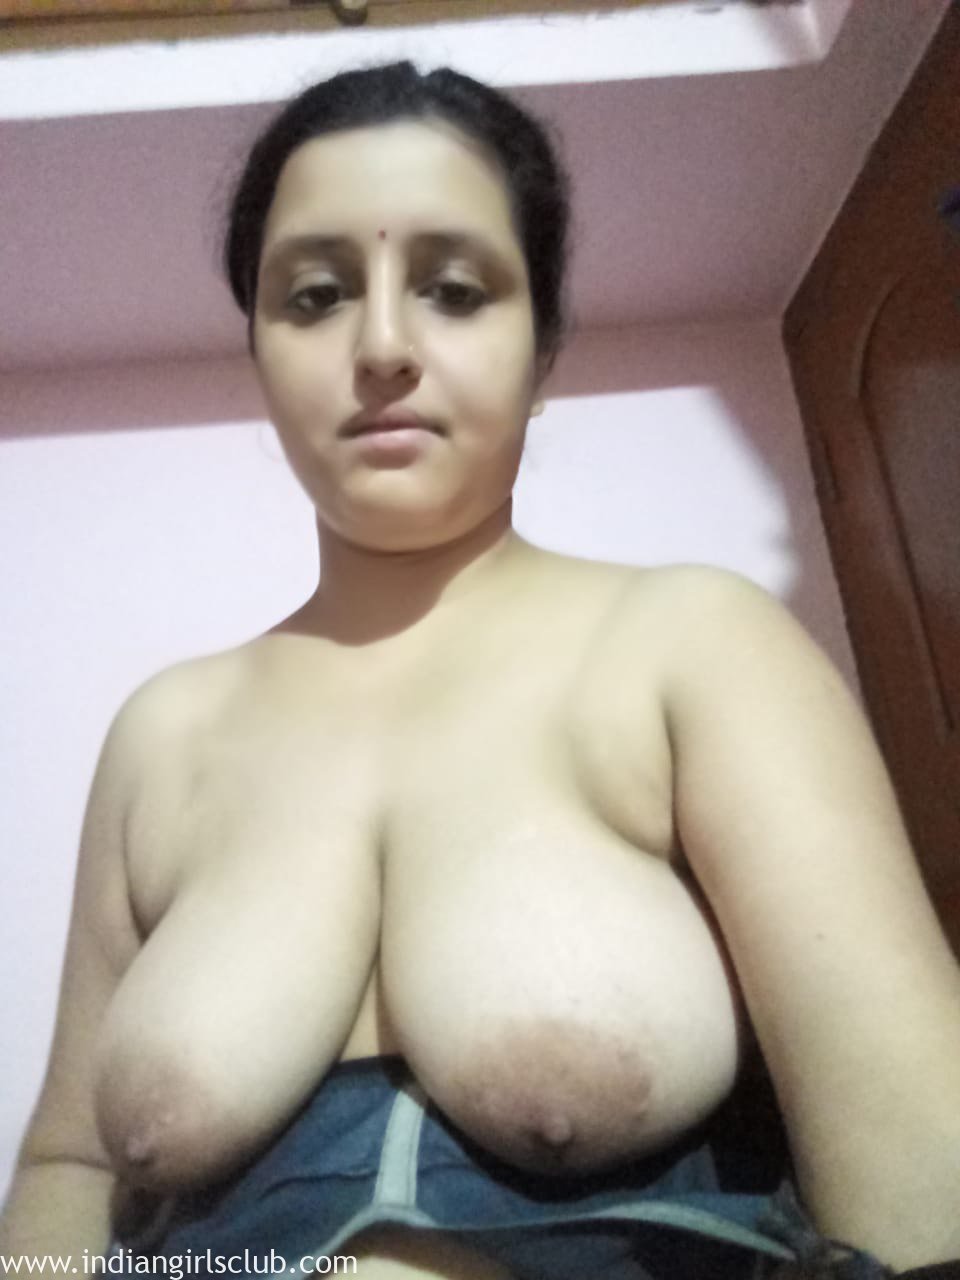 big-tits-bengali-indian-housewife-ready-for-hot-sex-19 - Indian Girls Club 